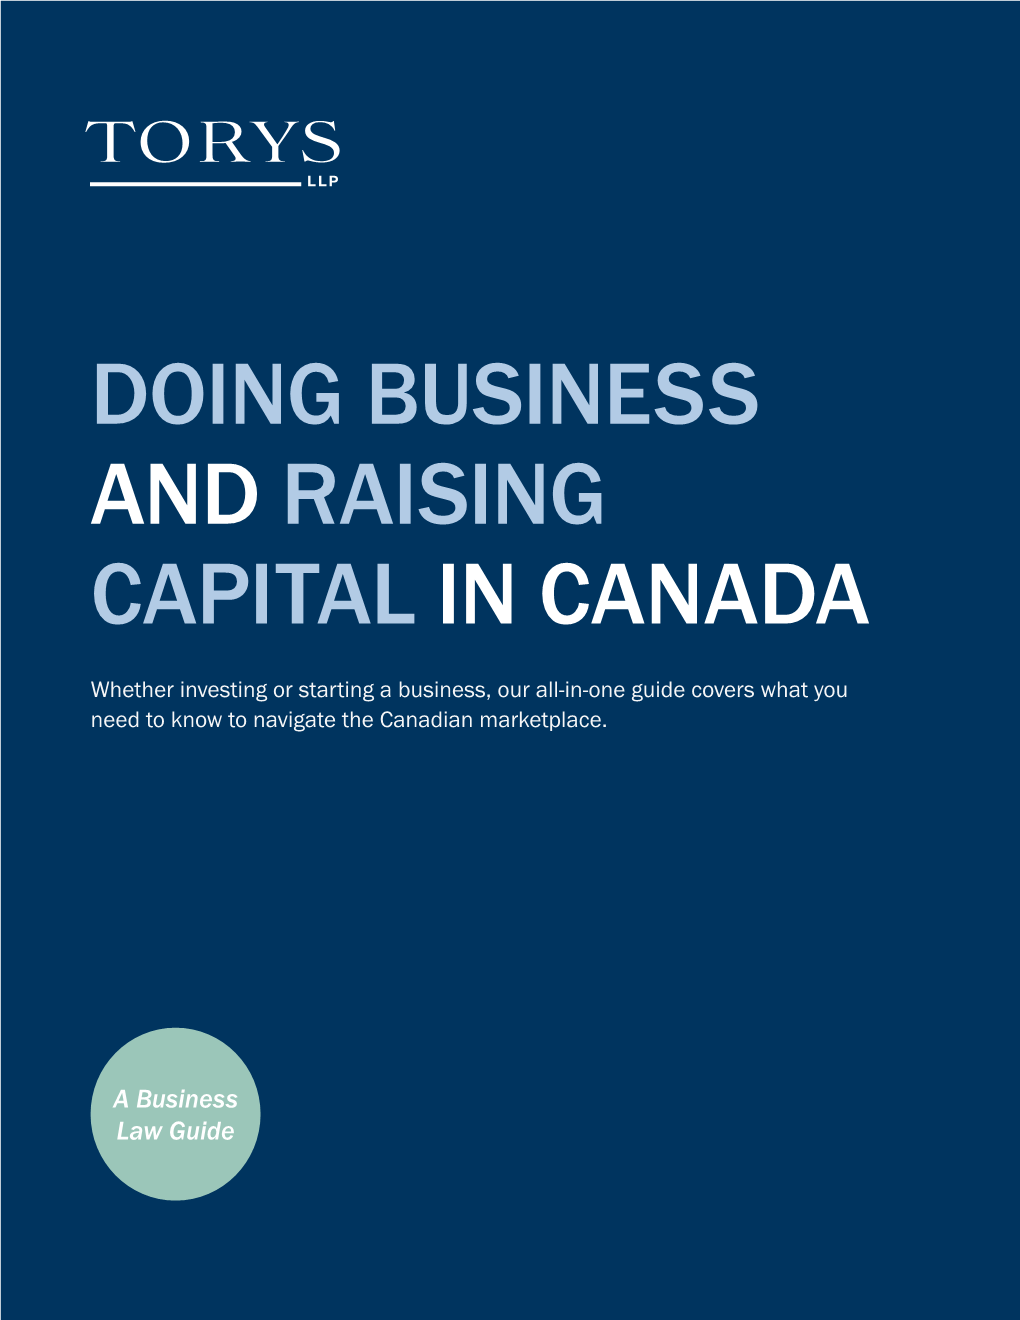 Doing Business and Raising Capital in Canada, a Business Law Guide